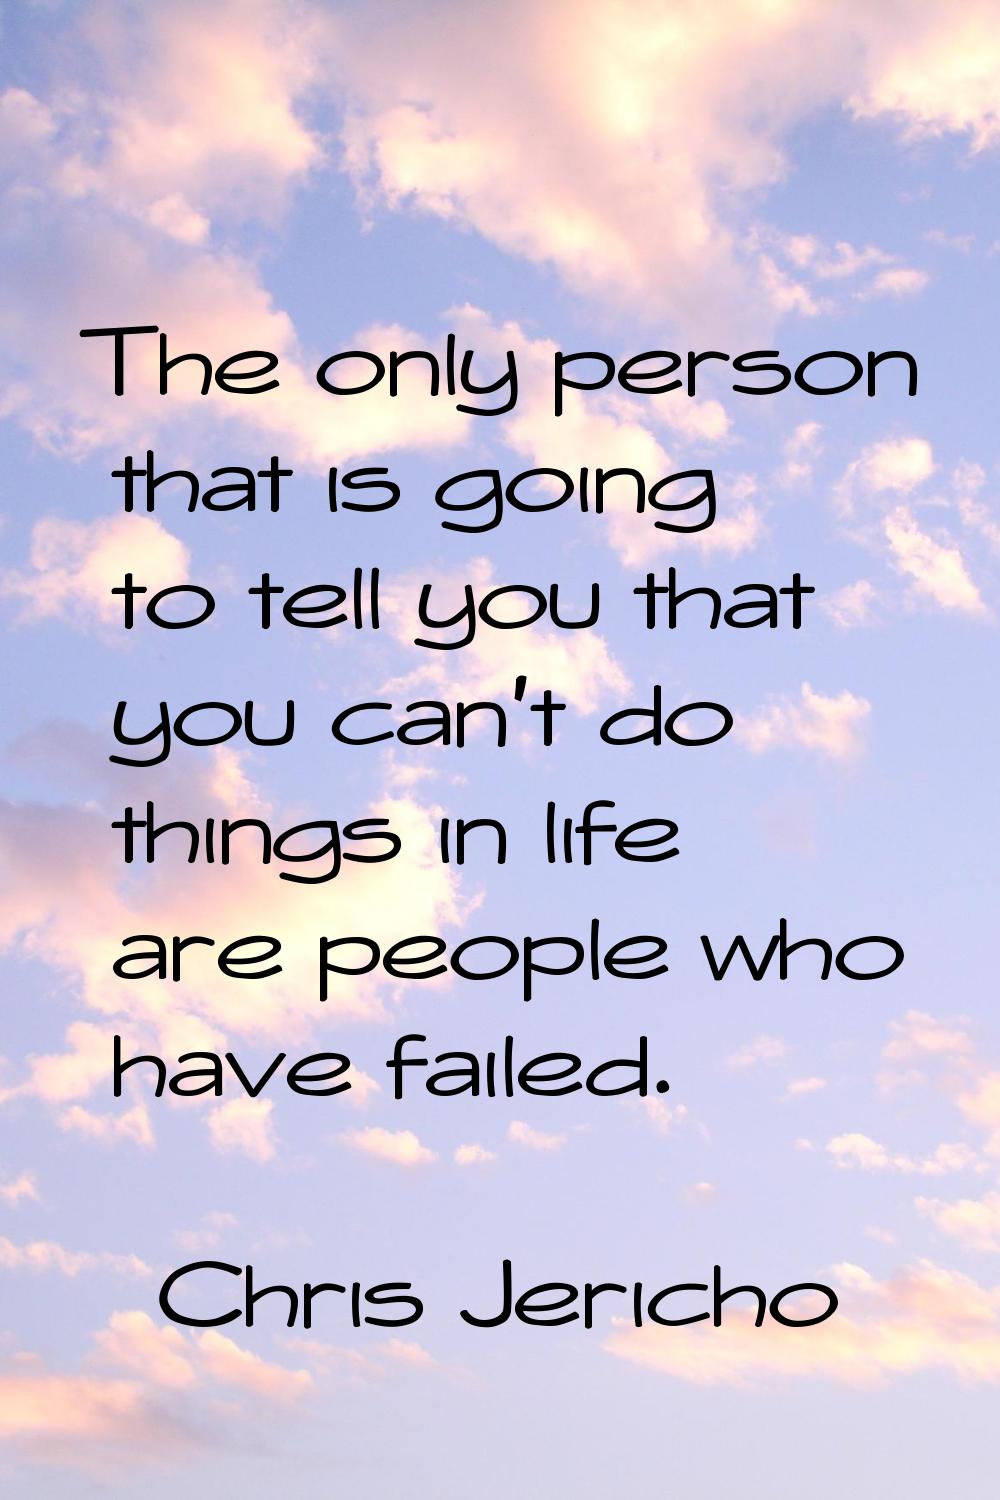 The only person that is going to tell you that you can't do things in life are people who have fail